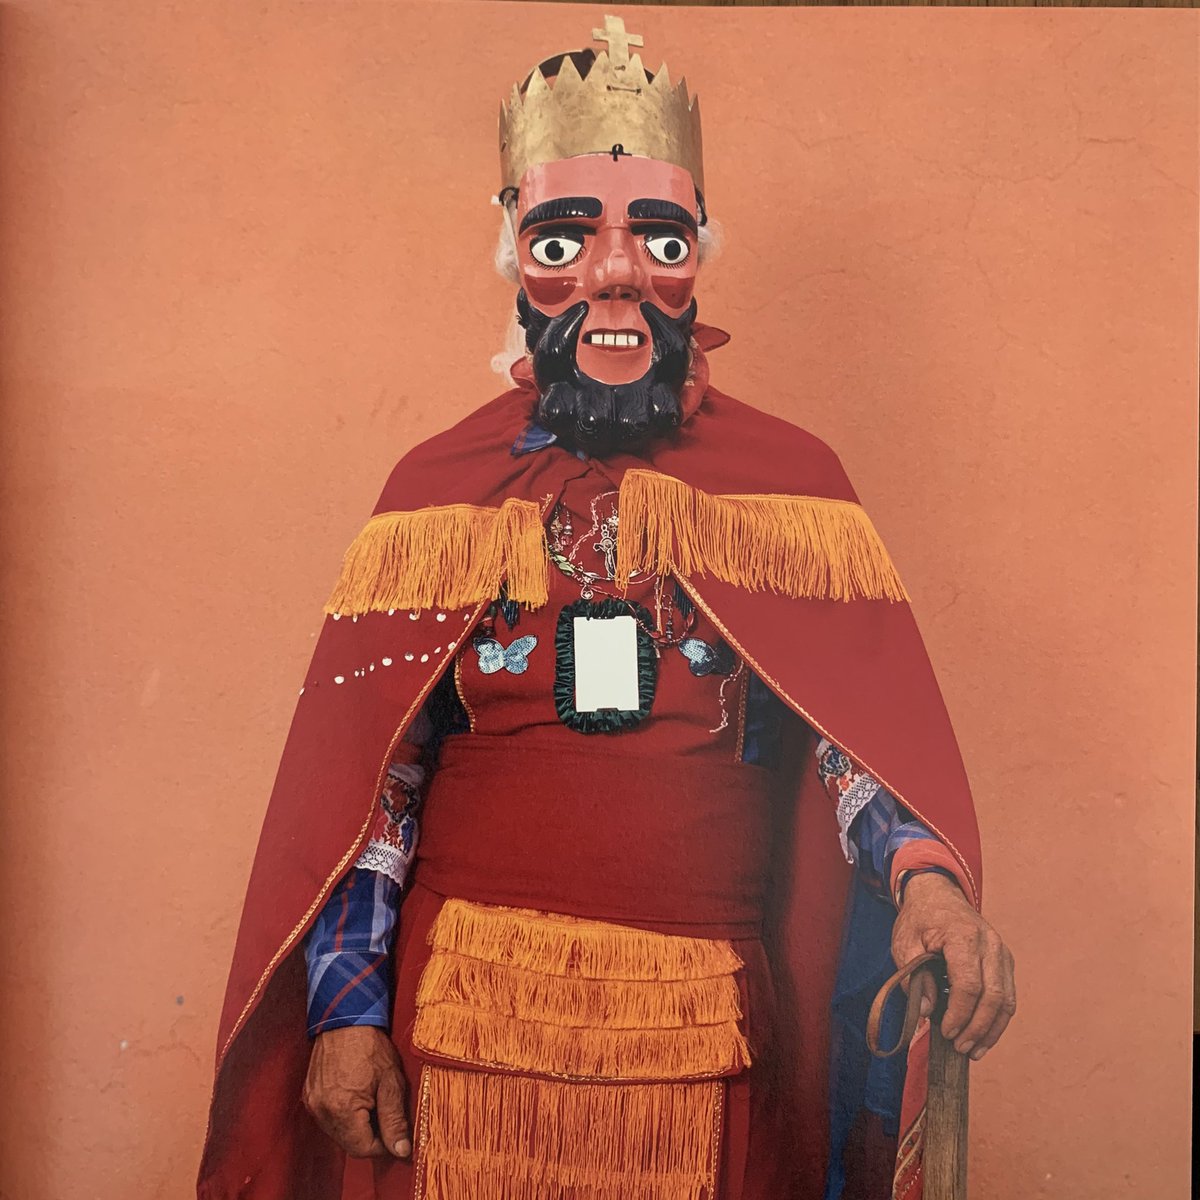 4/ Sergio Rodríguez-Blanco on the *structure of sacred time* that is actualized in masked rituals:“Through these rites, participants find themselves connecting to the time of origin, a time that does not pass by, because it is an eternal present”